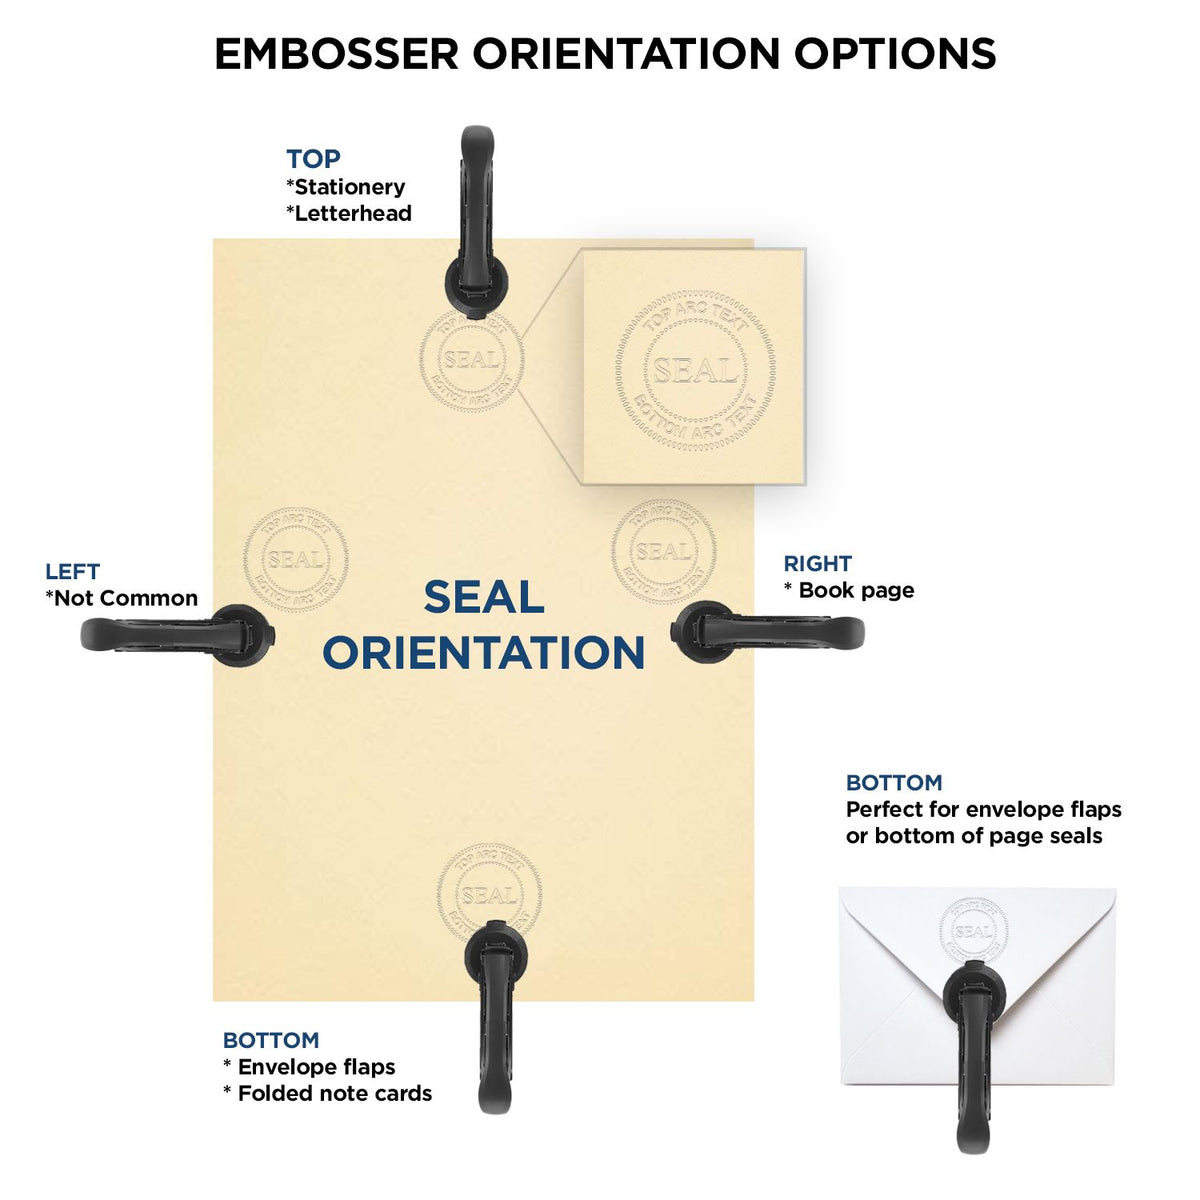 An infographic for the Handheld New Jersey Professional Geologist Embosser showing embosser orientation, this is showing examples of a top, bottom, right and left insert.